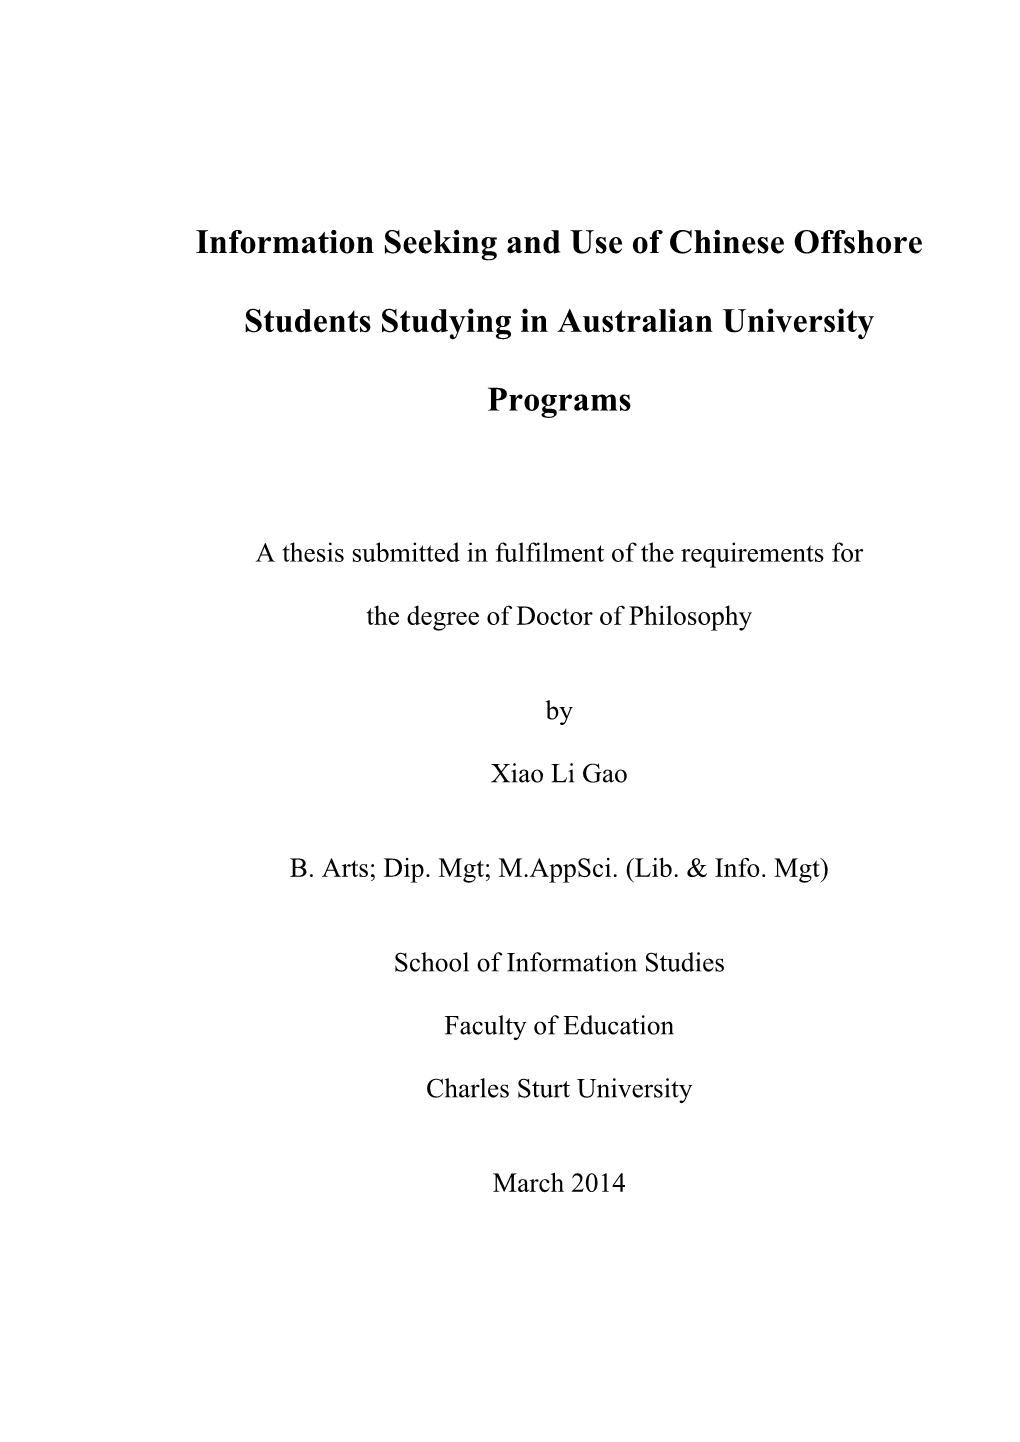 Information Seeking and Use of Chinese Offshore Students Studying in Australian University Programs” Is New Within a Specific Context